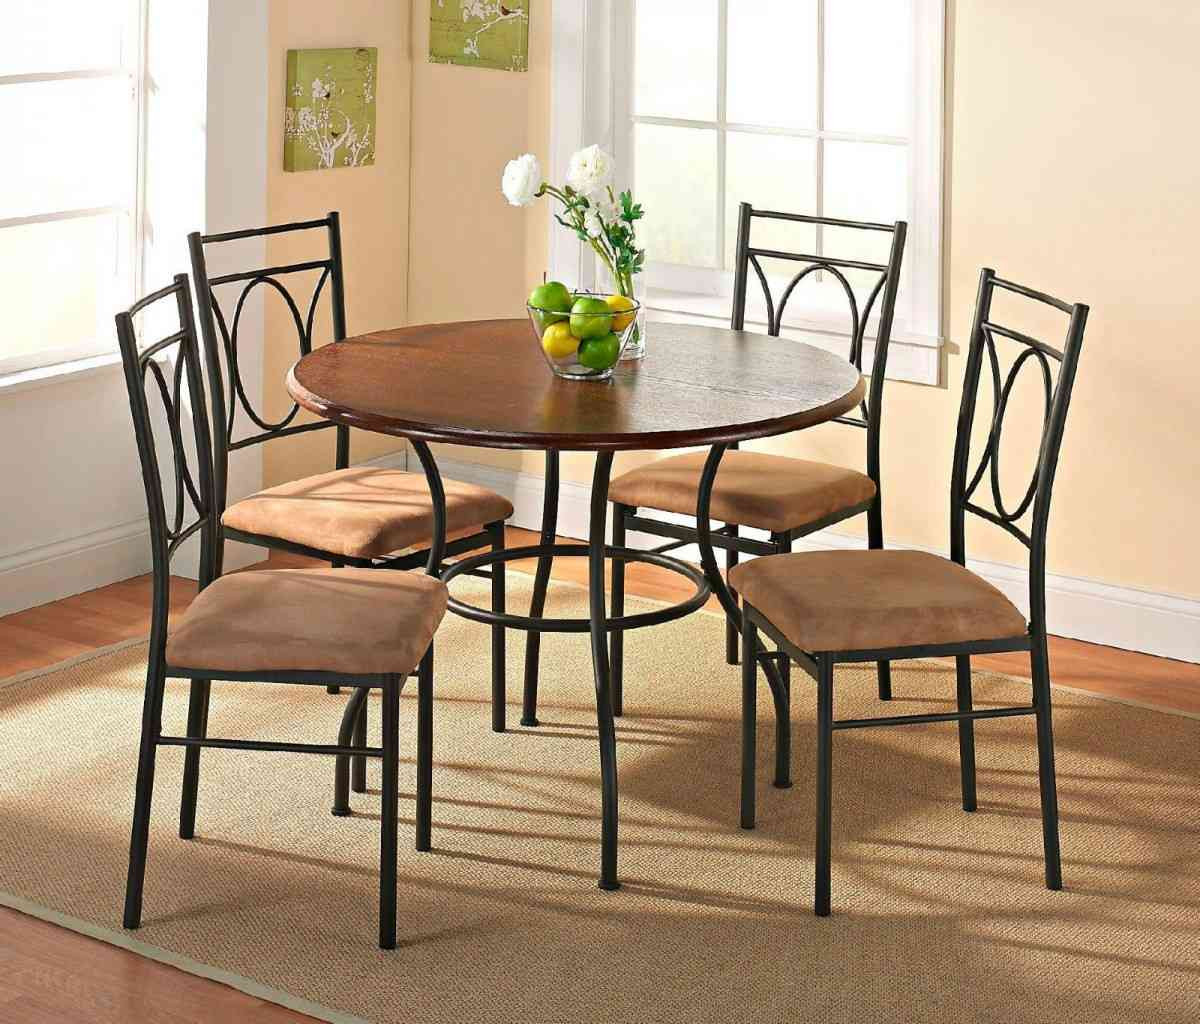 Dinette Set For Small Kitchen
 Kitchen Perfect For Kitchen And Small Area With 3 Piece